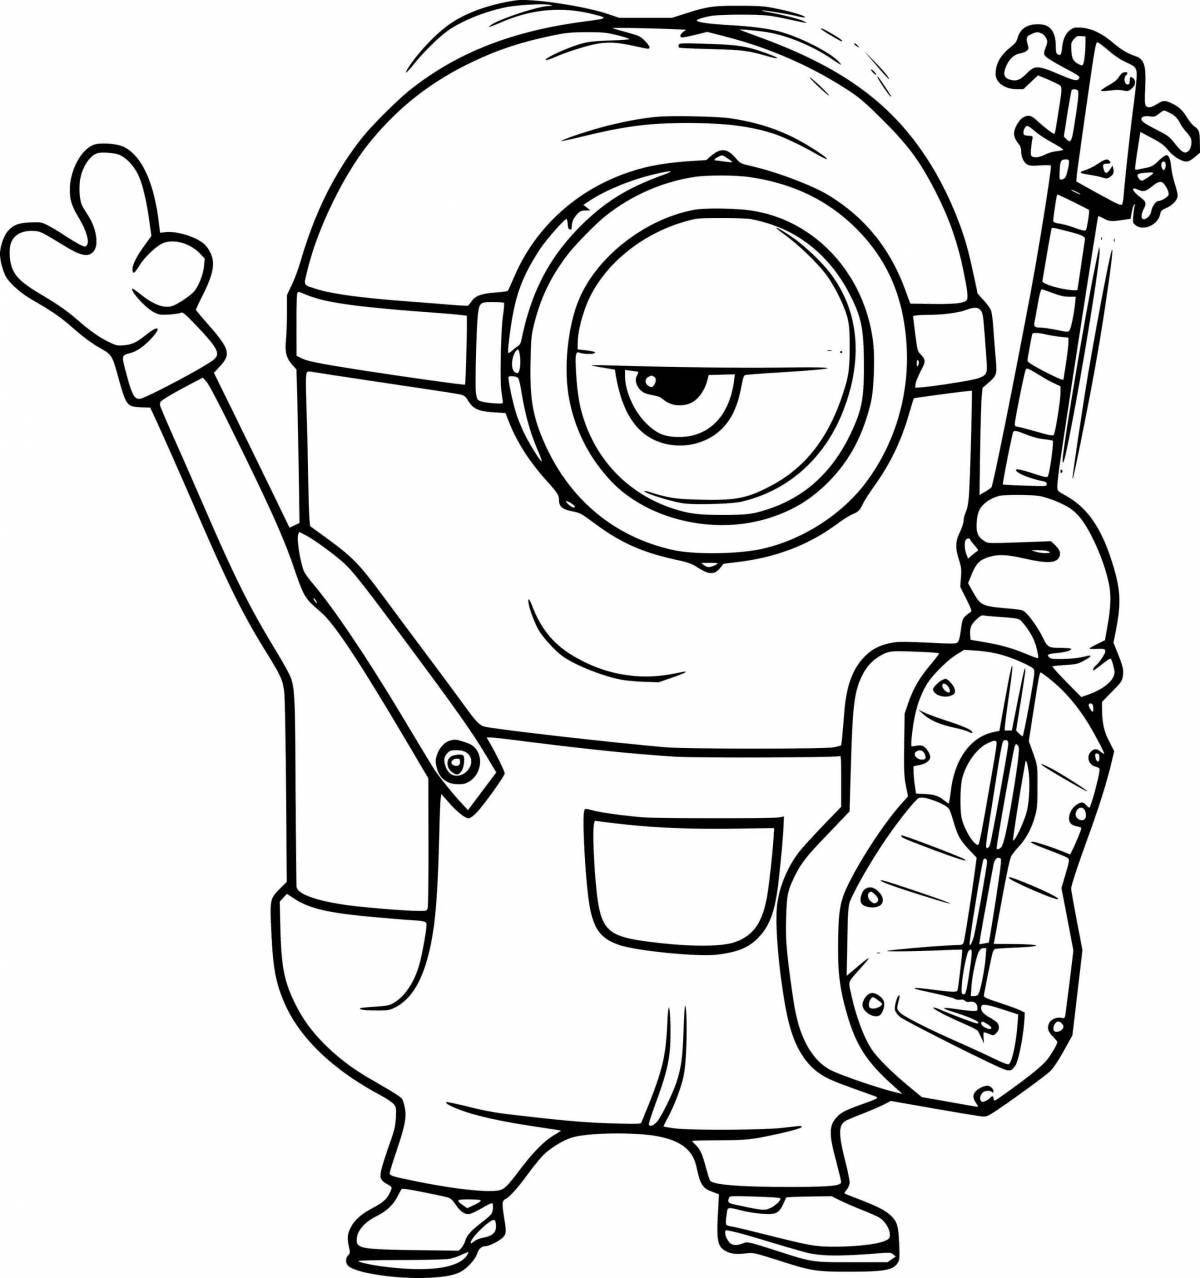 Radiant coloring page minion strawberry